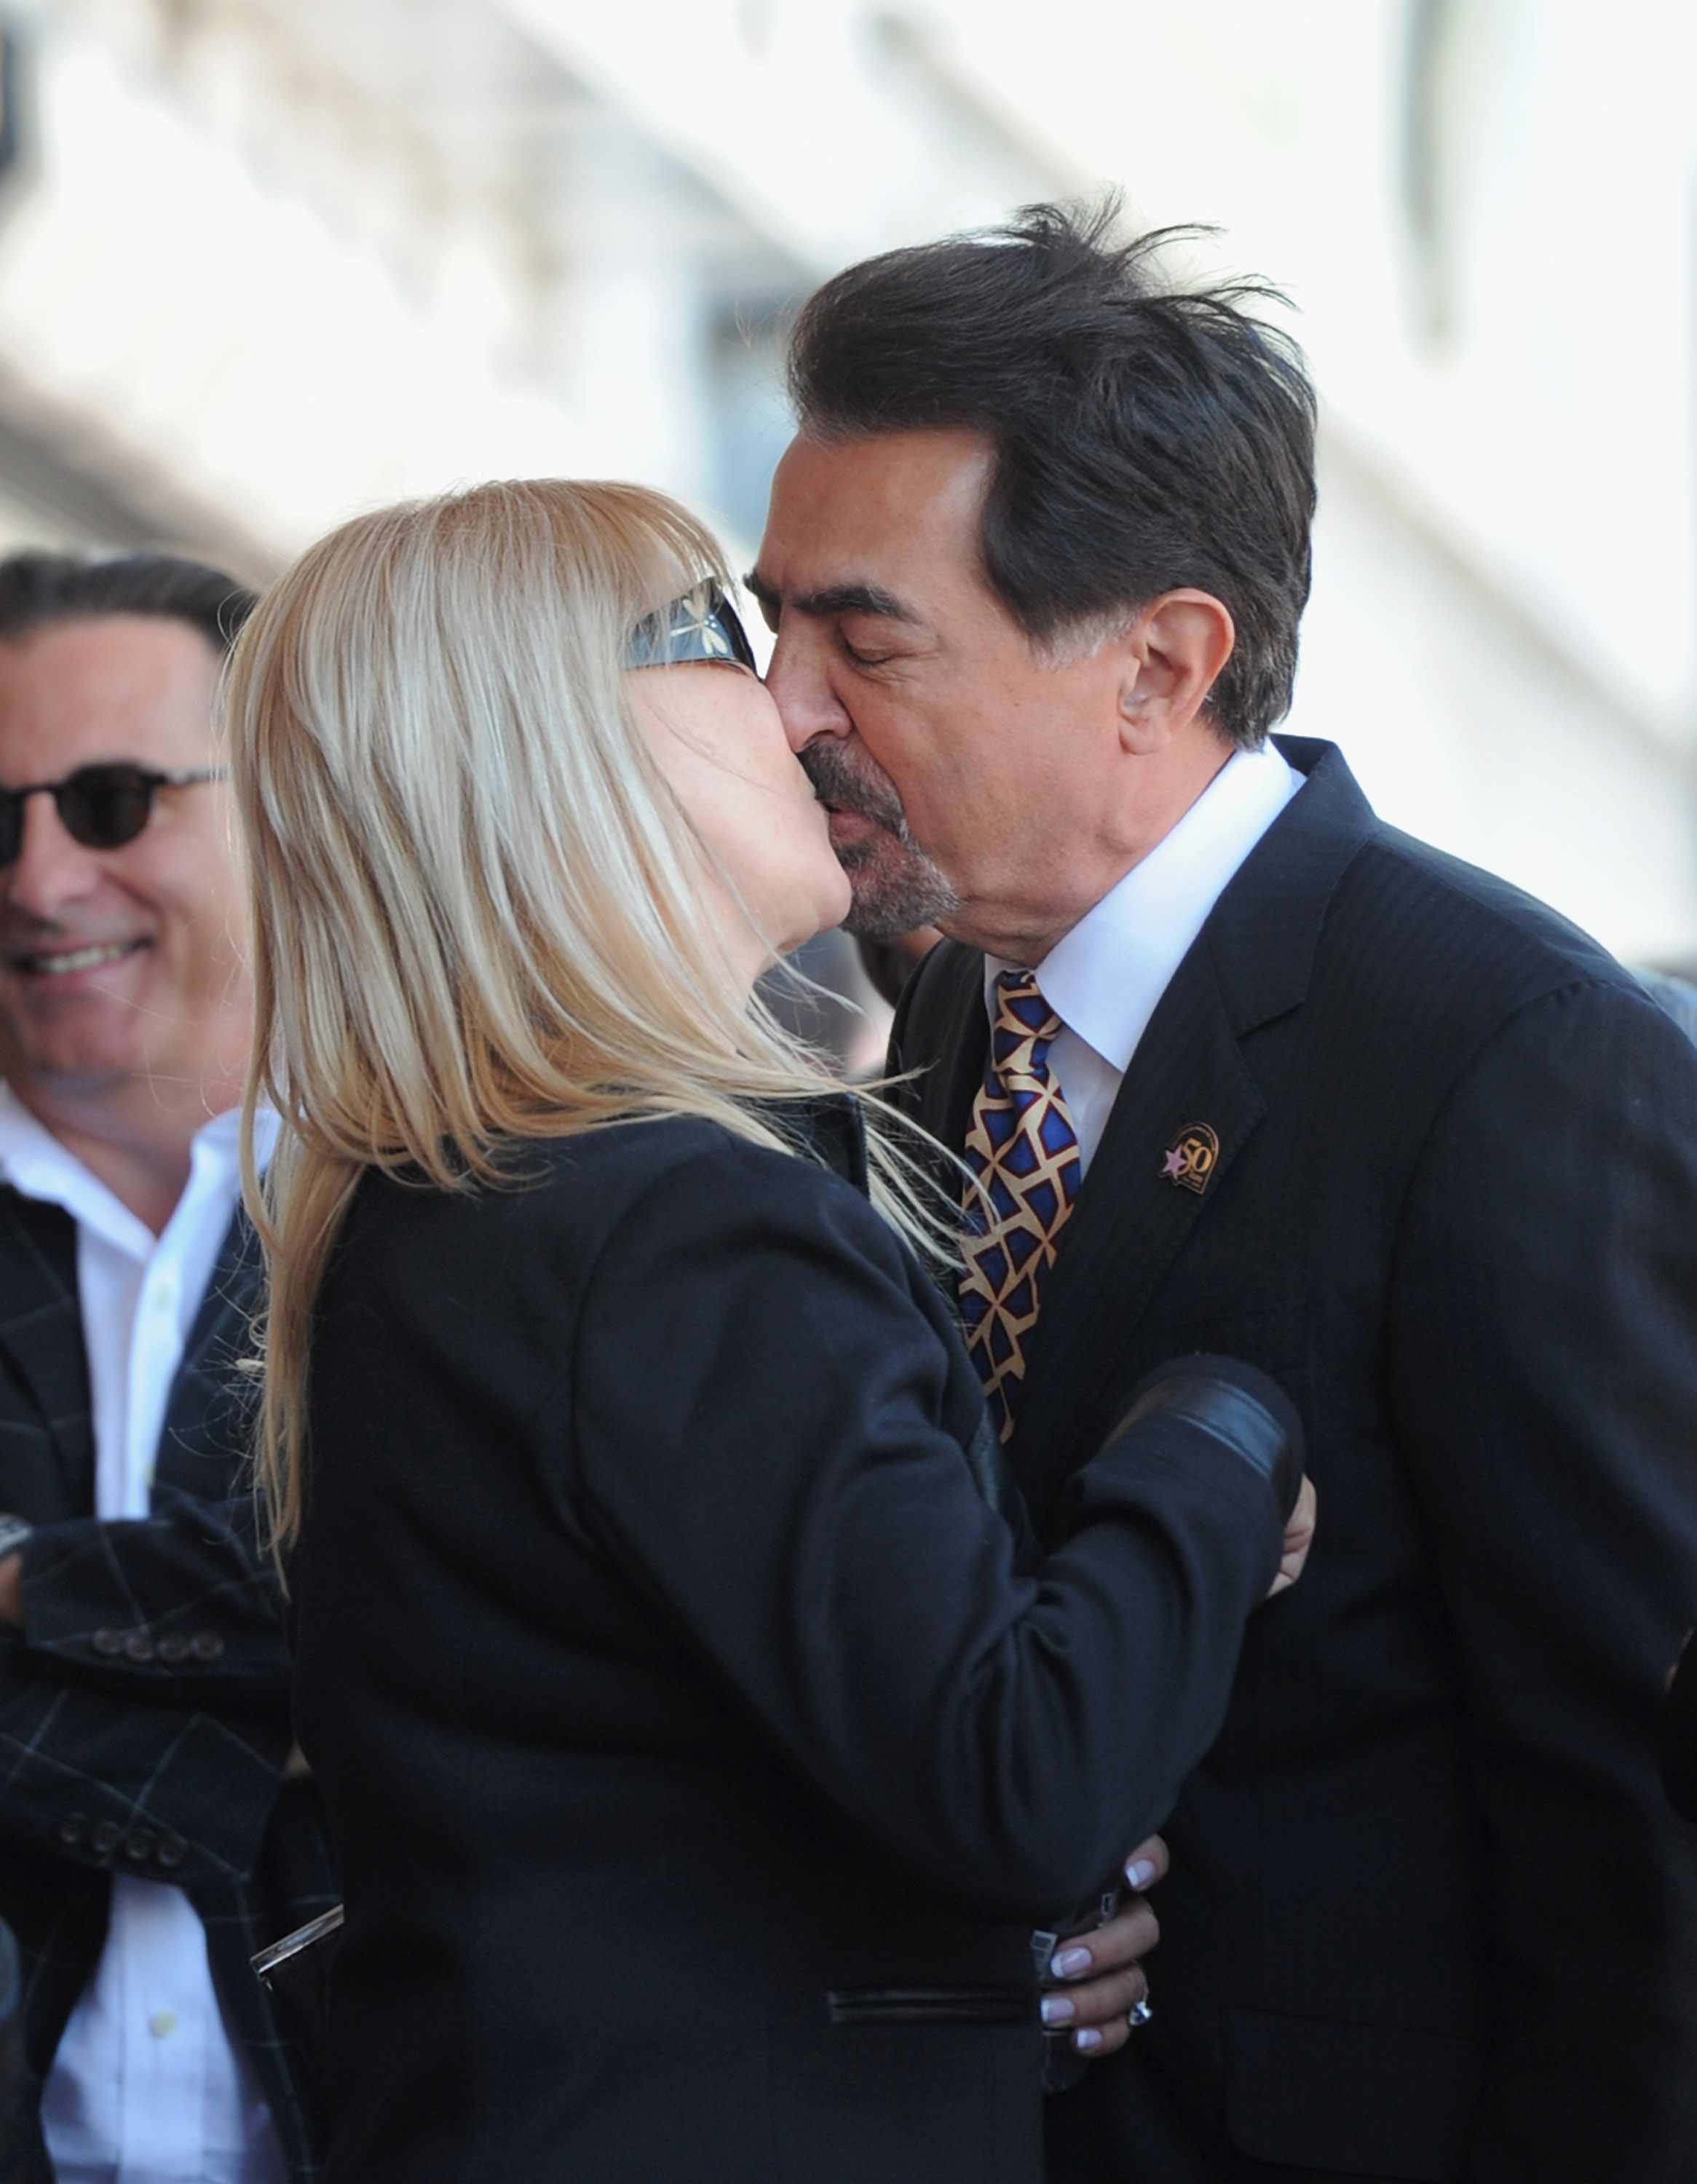 Arlene Mantegna and actor Joe Mantegna attend the star ceremony honoring actor Joe Mantegna with the 2,438th star on the Hollywood Walk of Fame on April 29, 2011, in Hollywood, California | Source: Getty Images